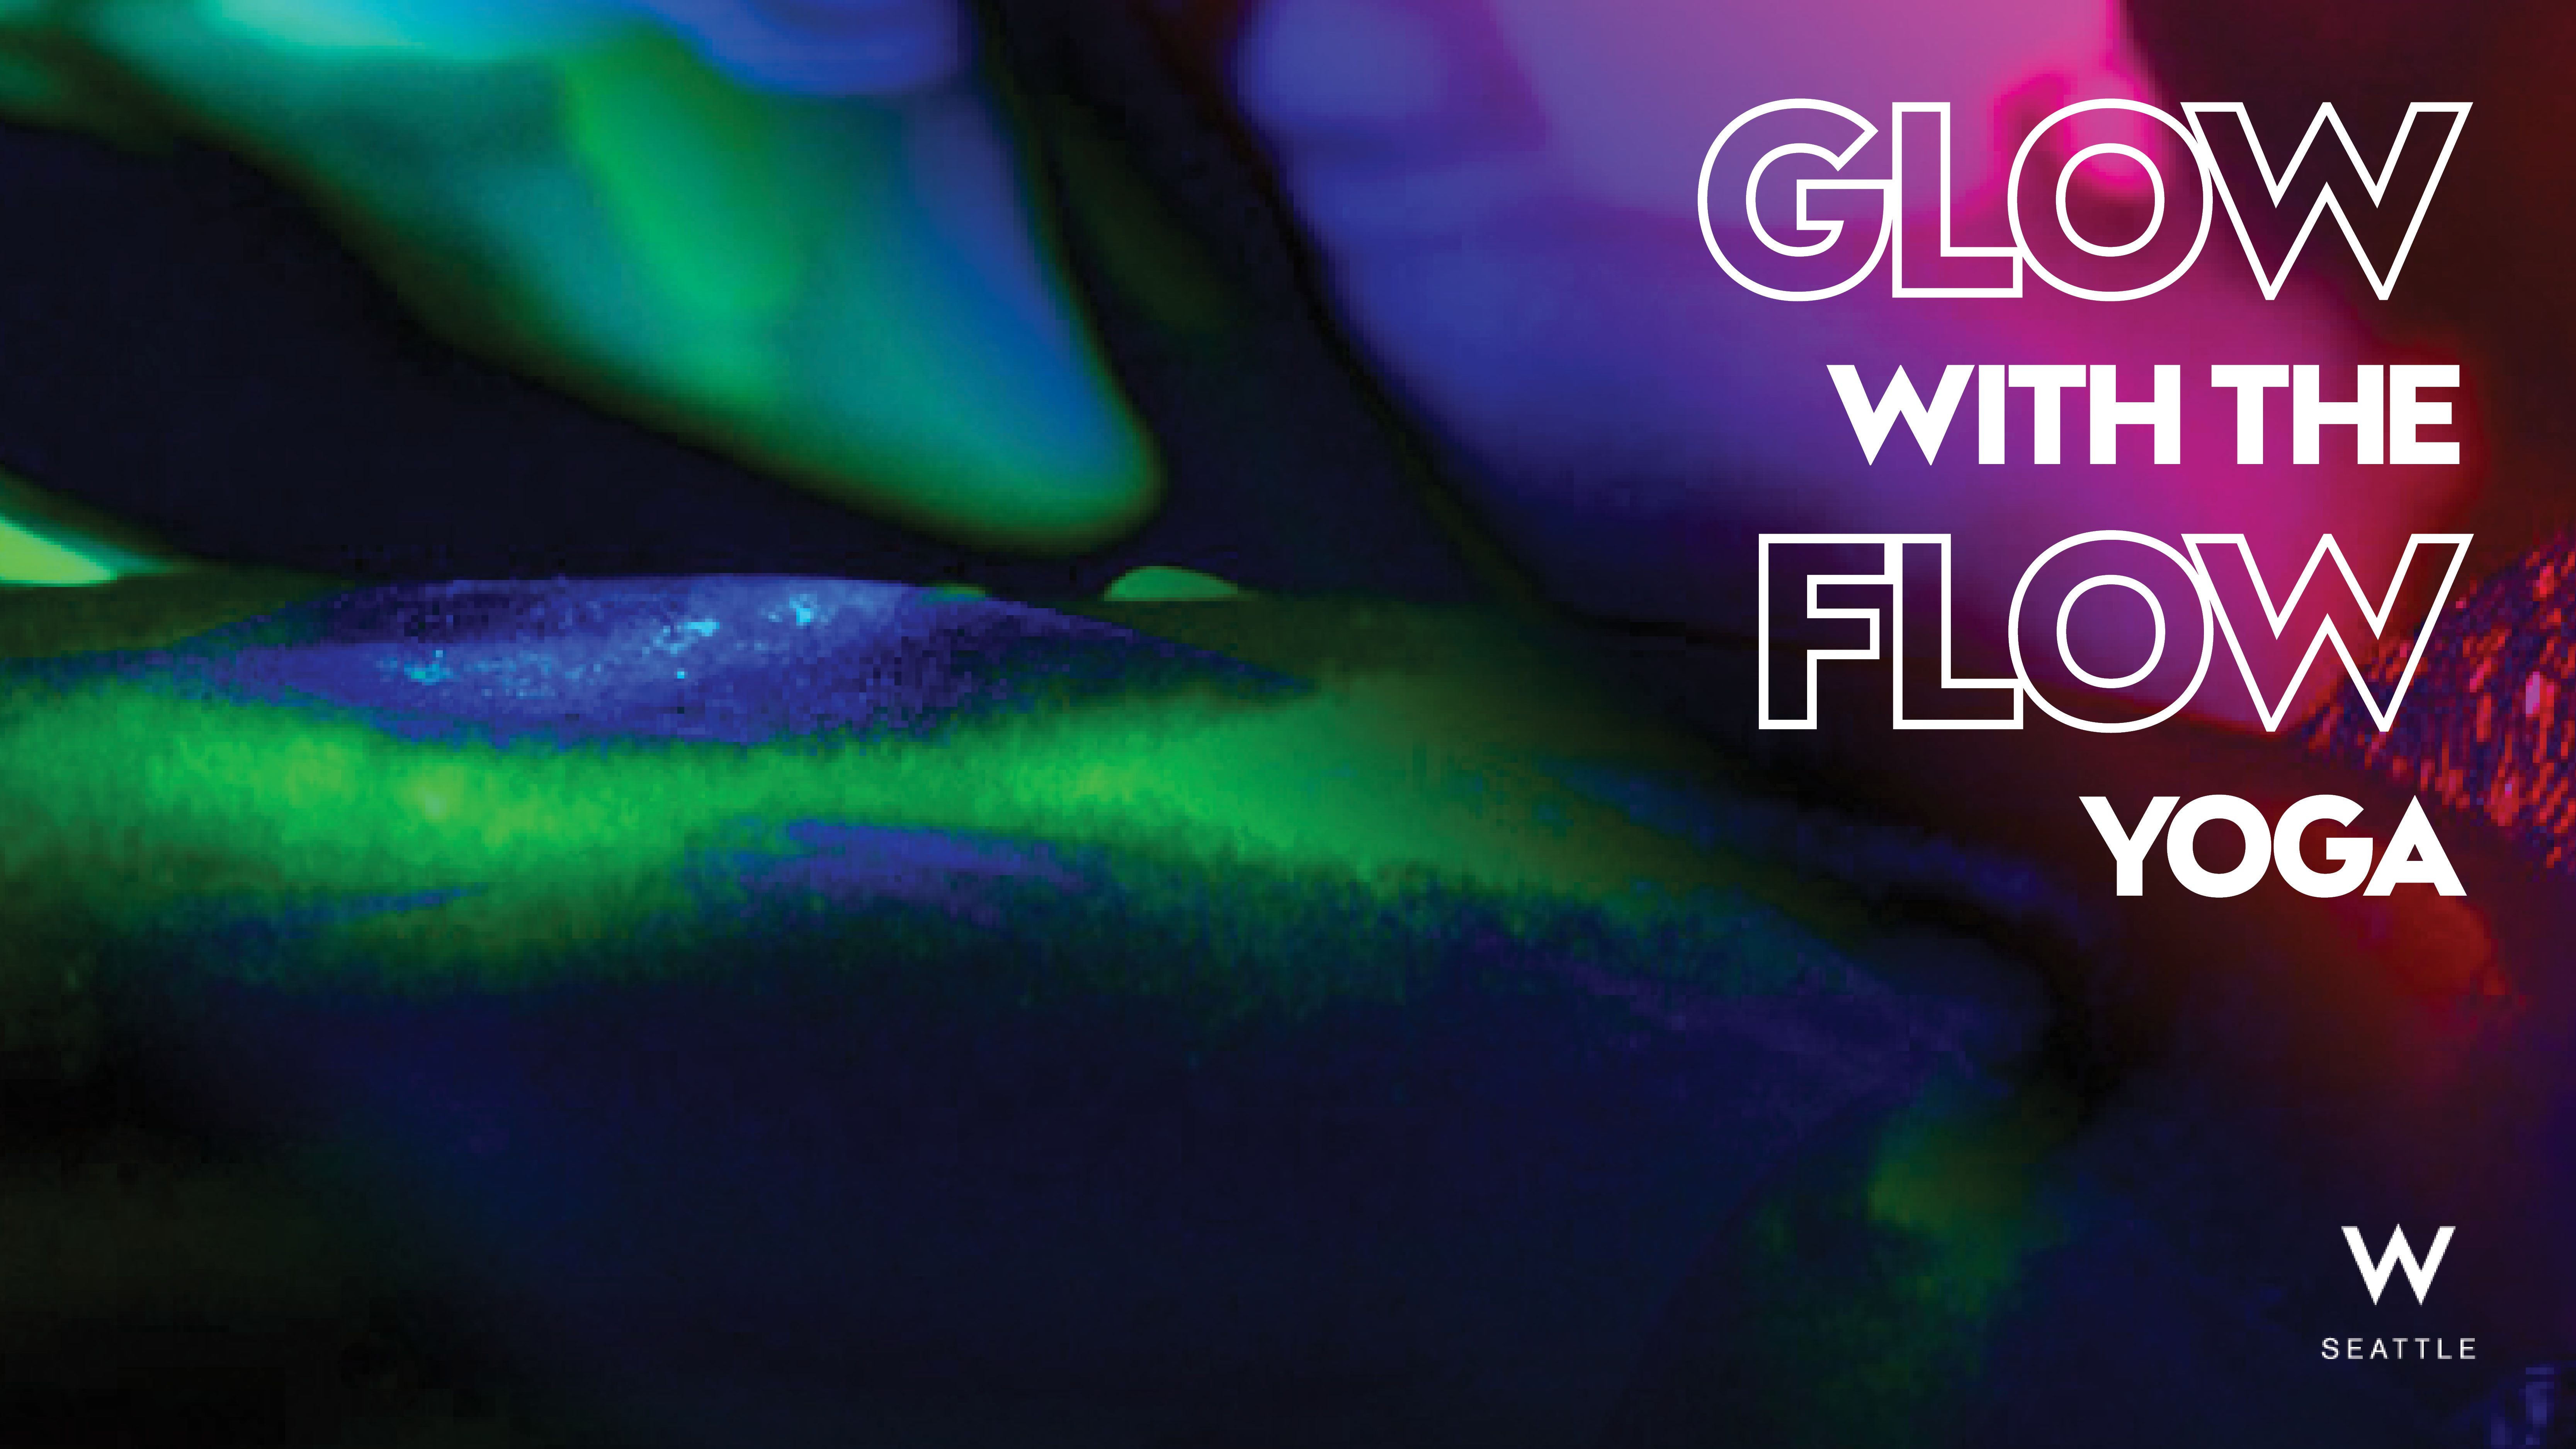 Glow With The Flow Yoga W Seattle